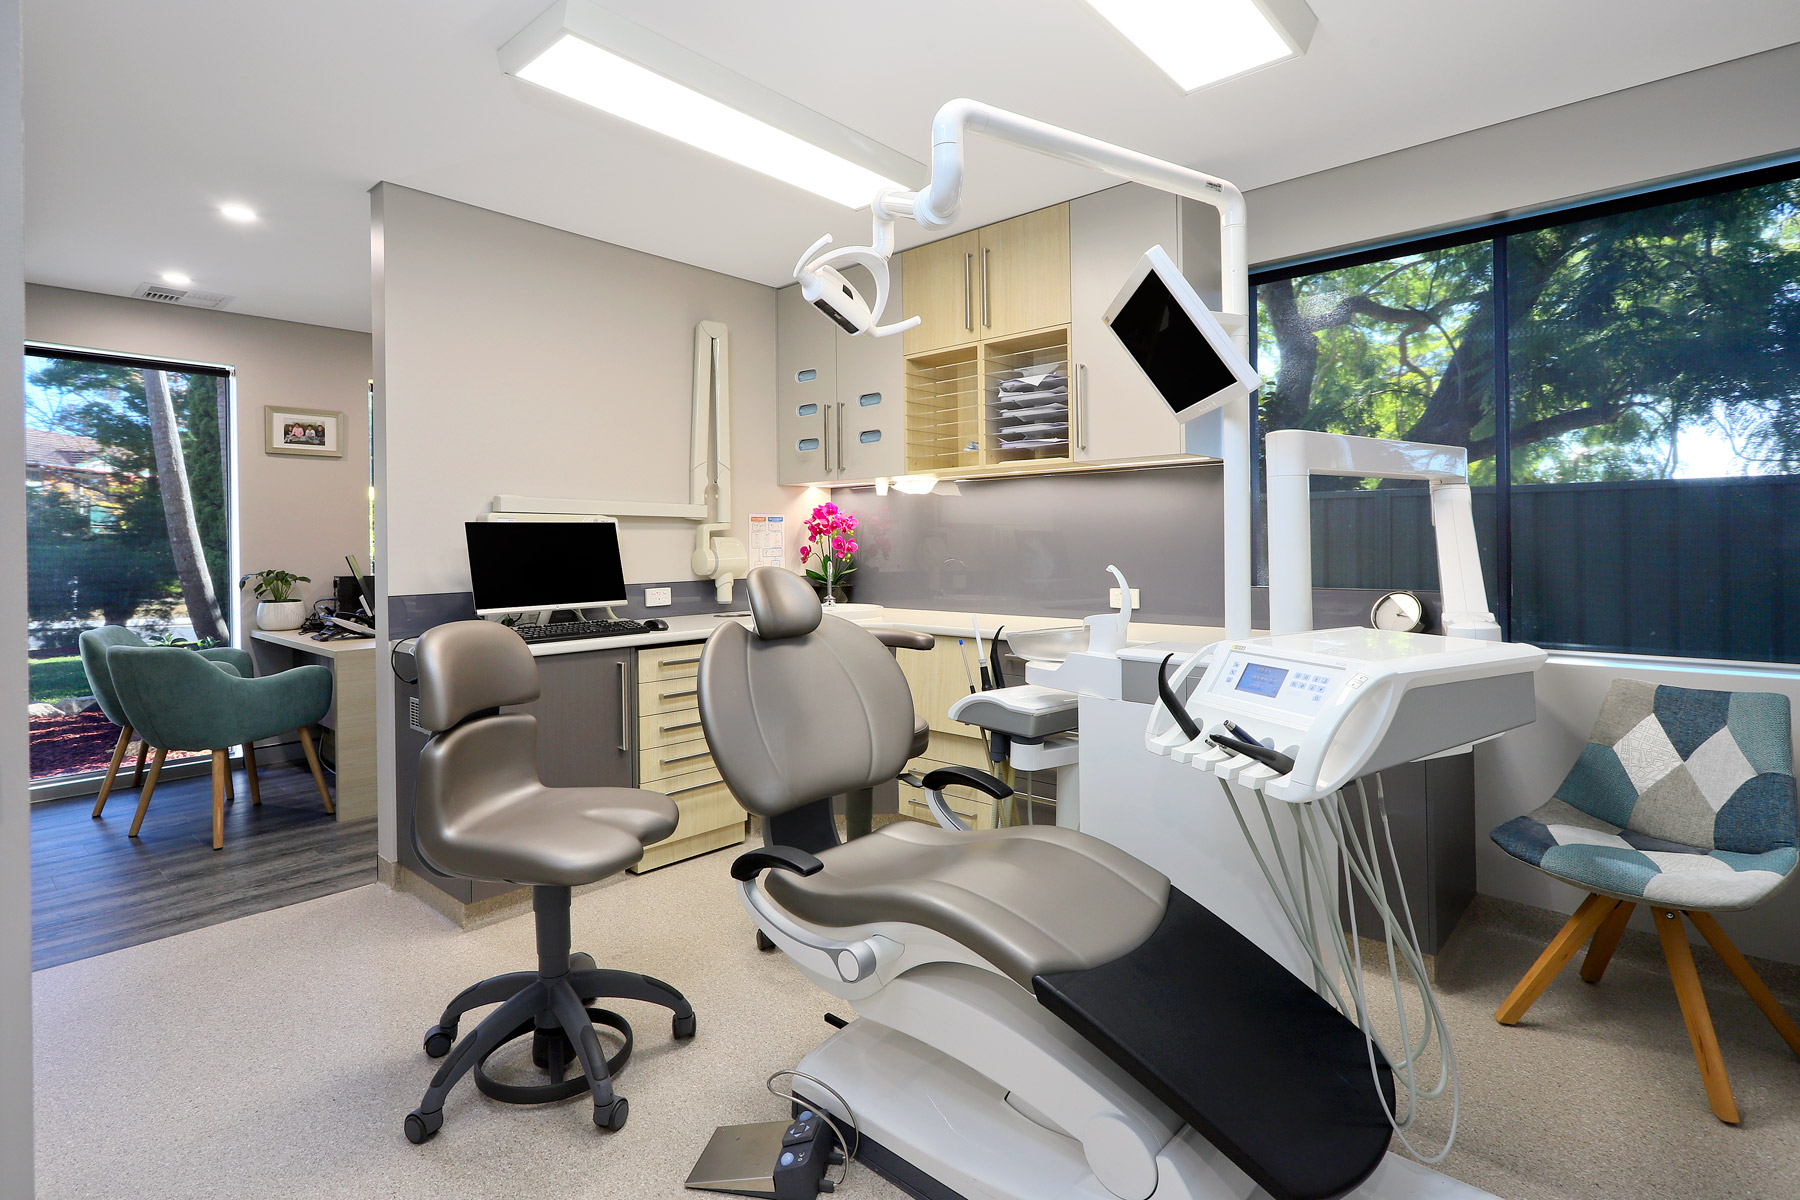 JG Dental surgery with private consultion area